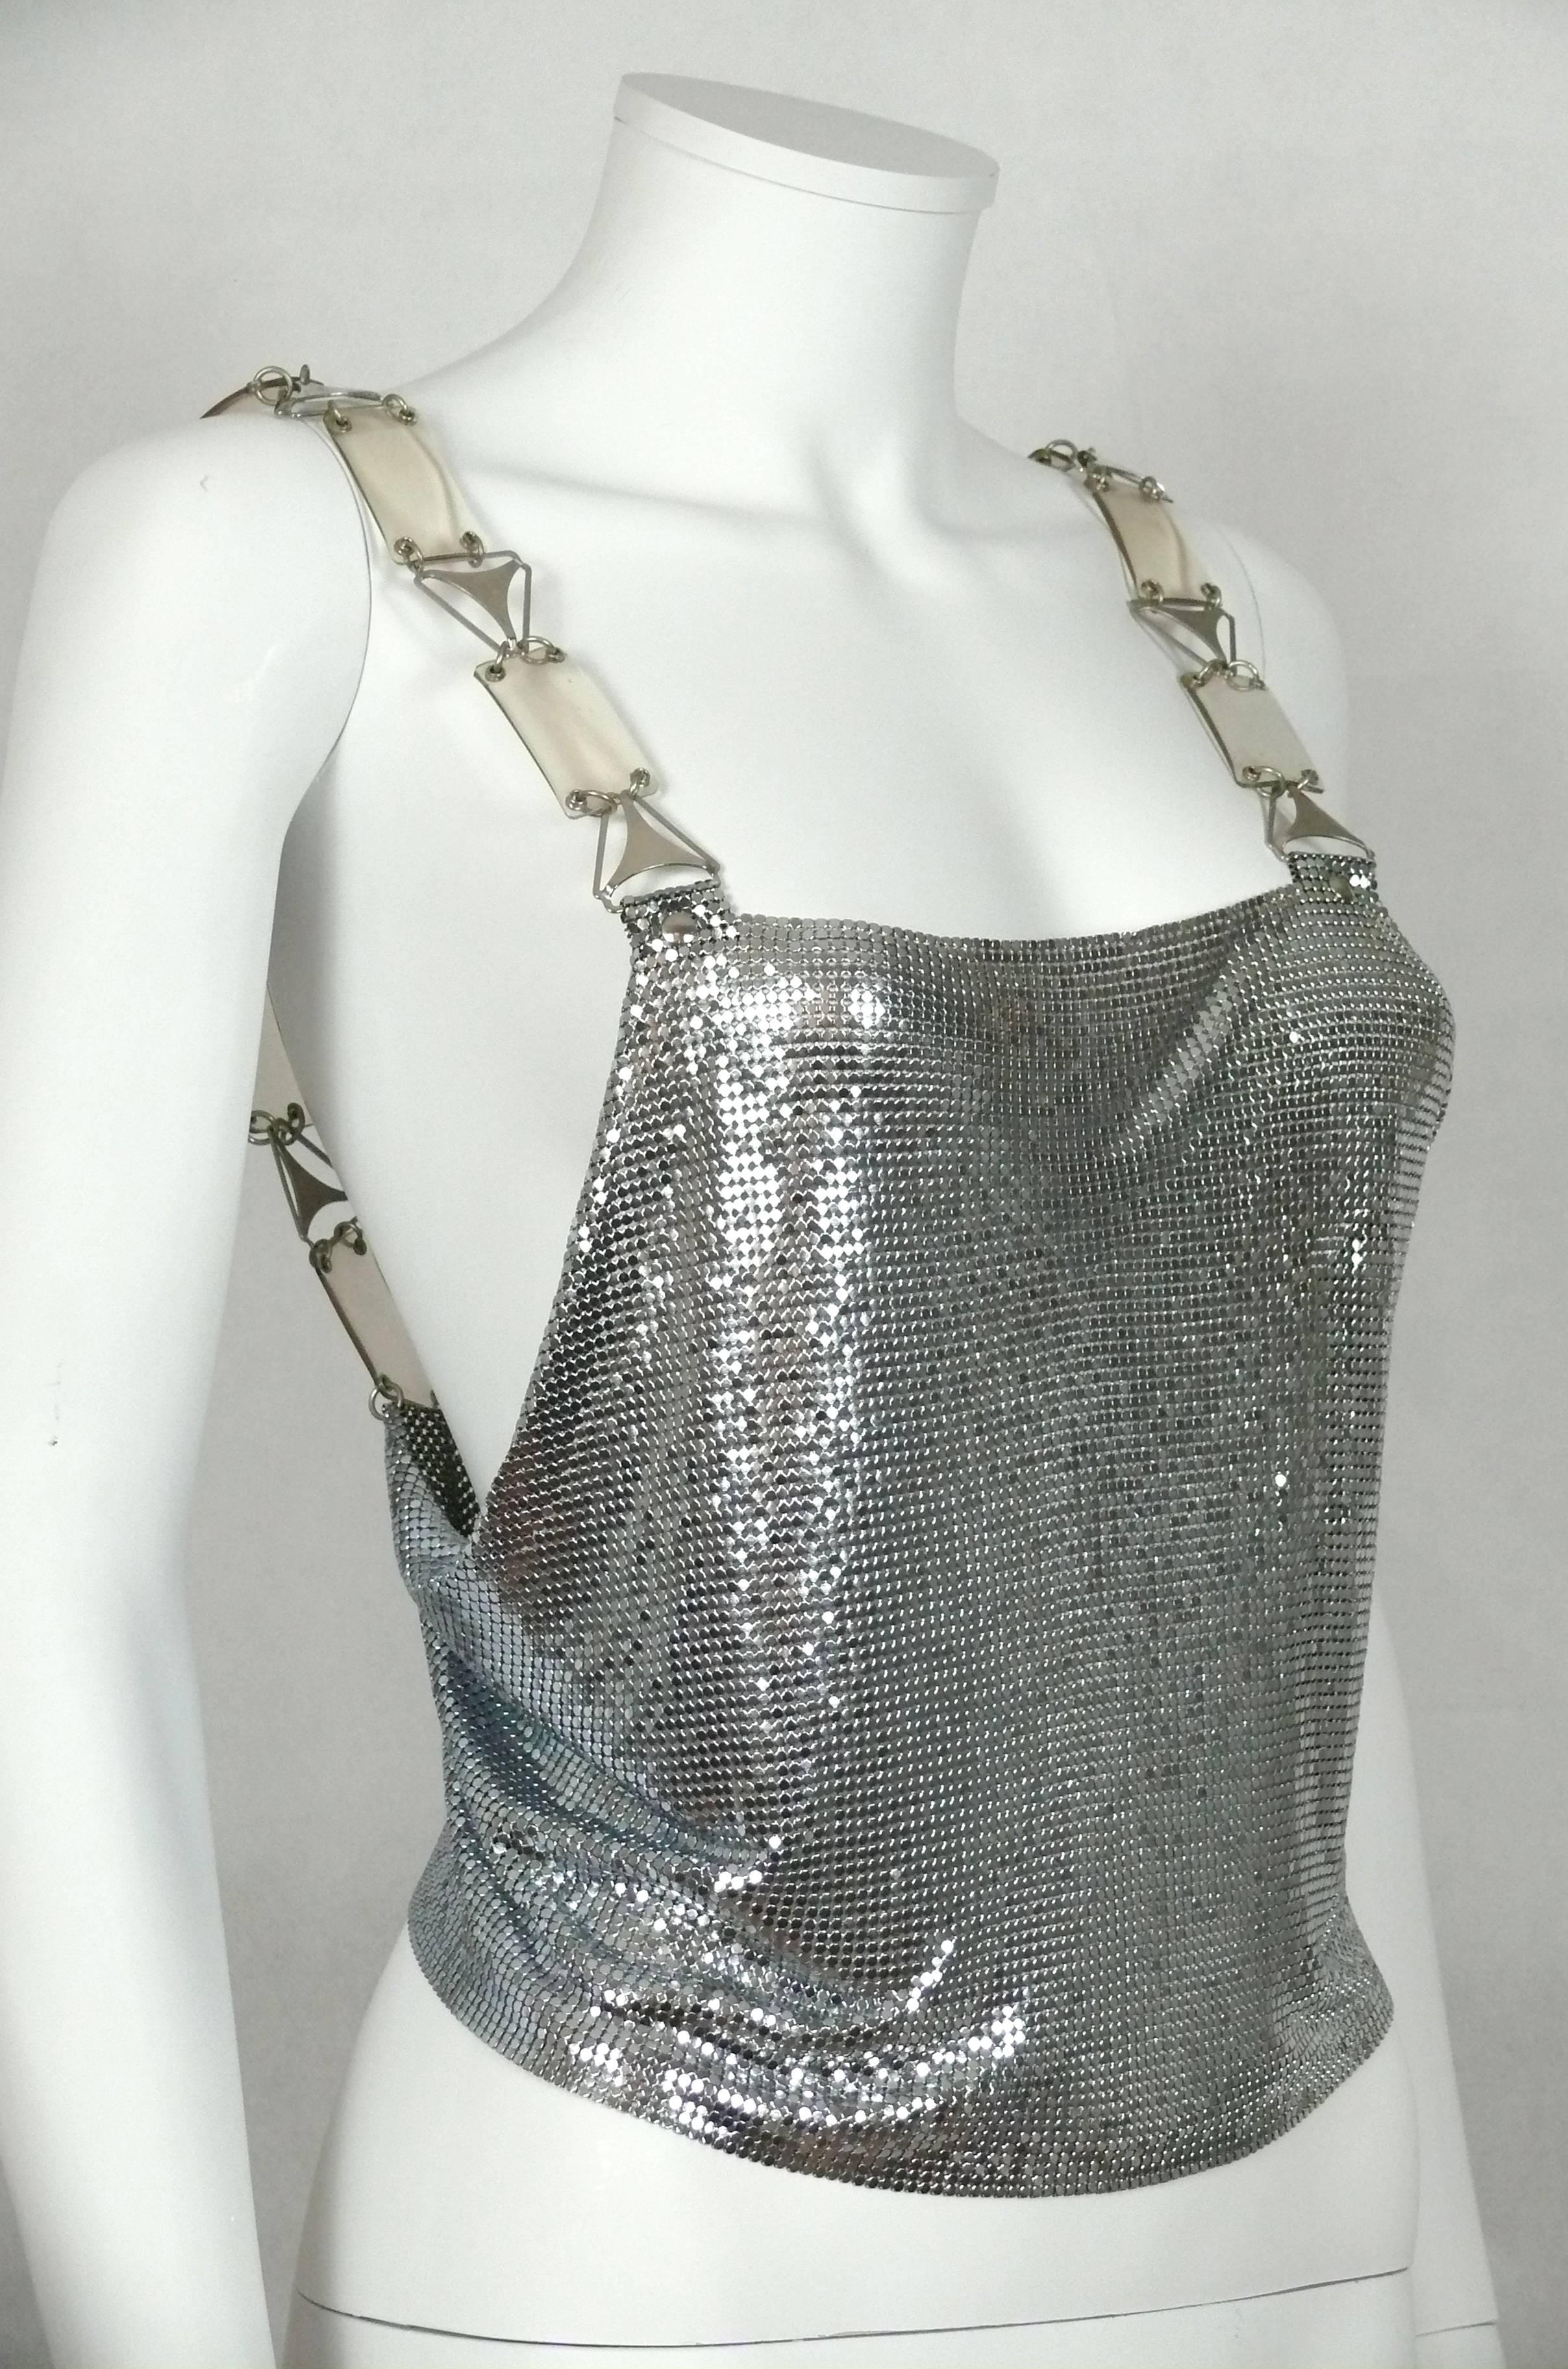 PACO RABANNE style silver metal mesh tank top with gorgeous plastic and metal chain straps.

Back lobster clasp closure.

Indicative measurements taken laid flat : length approx 49 cm (18.50 inches).

Photographed on a FR 36 size mannequin